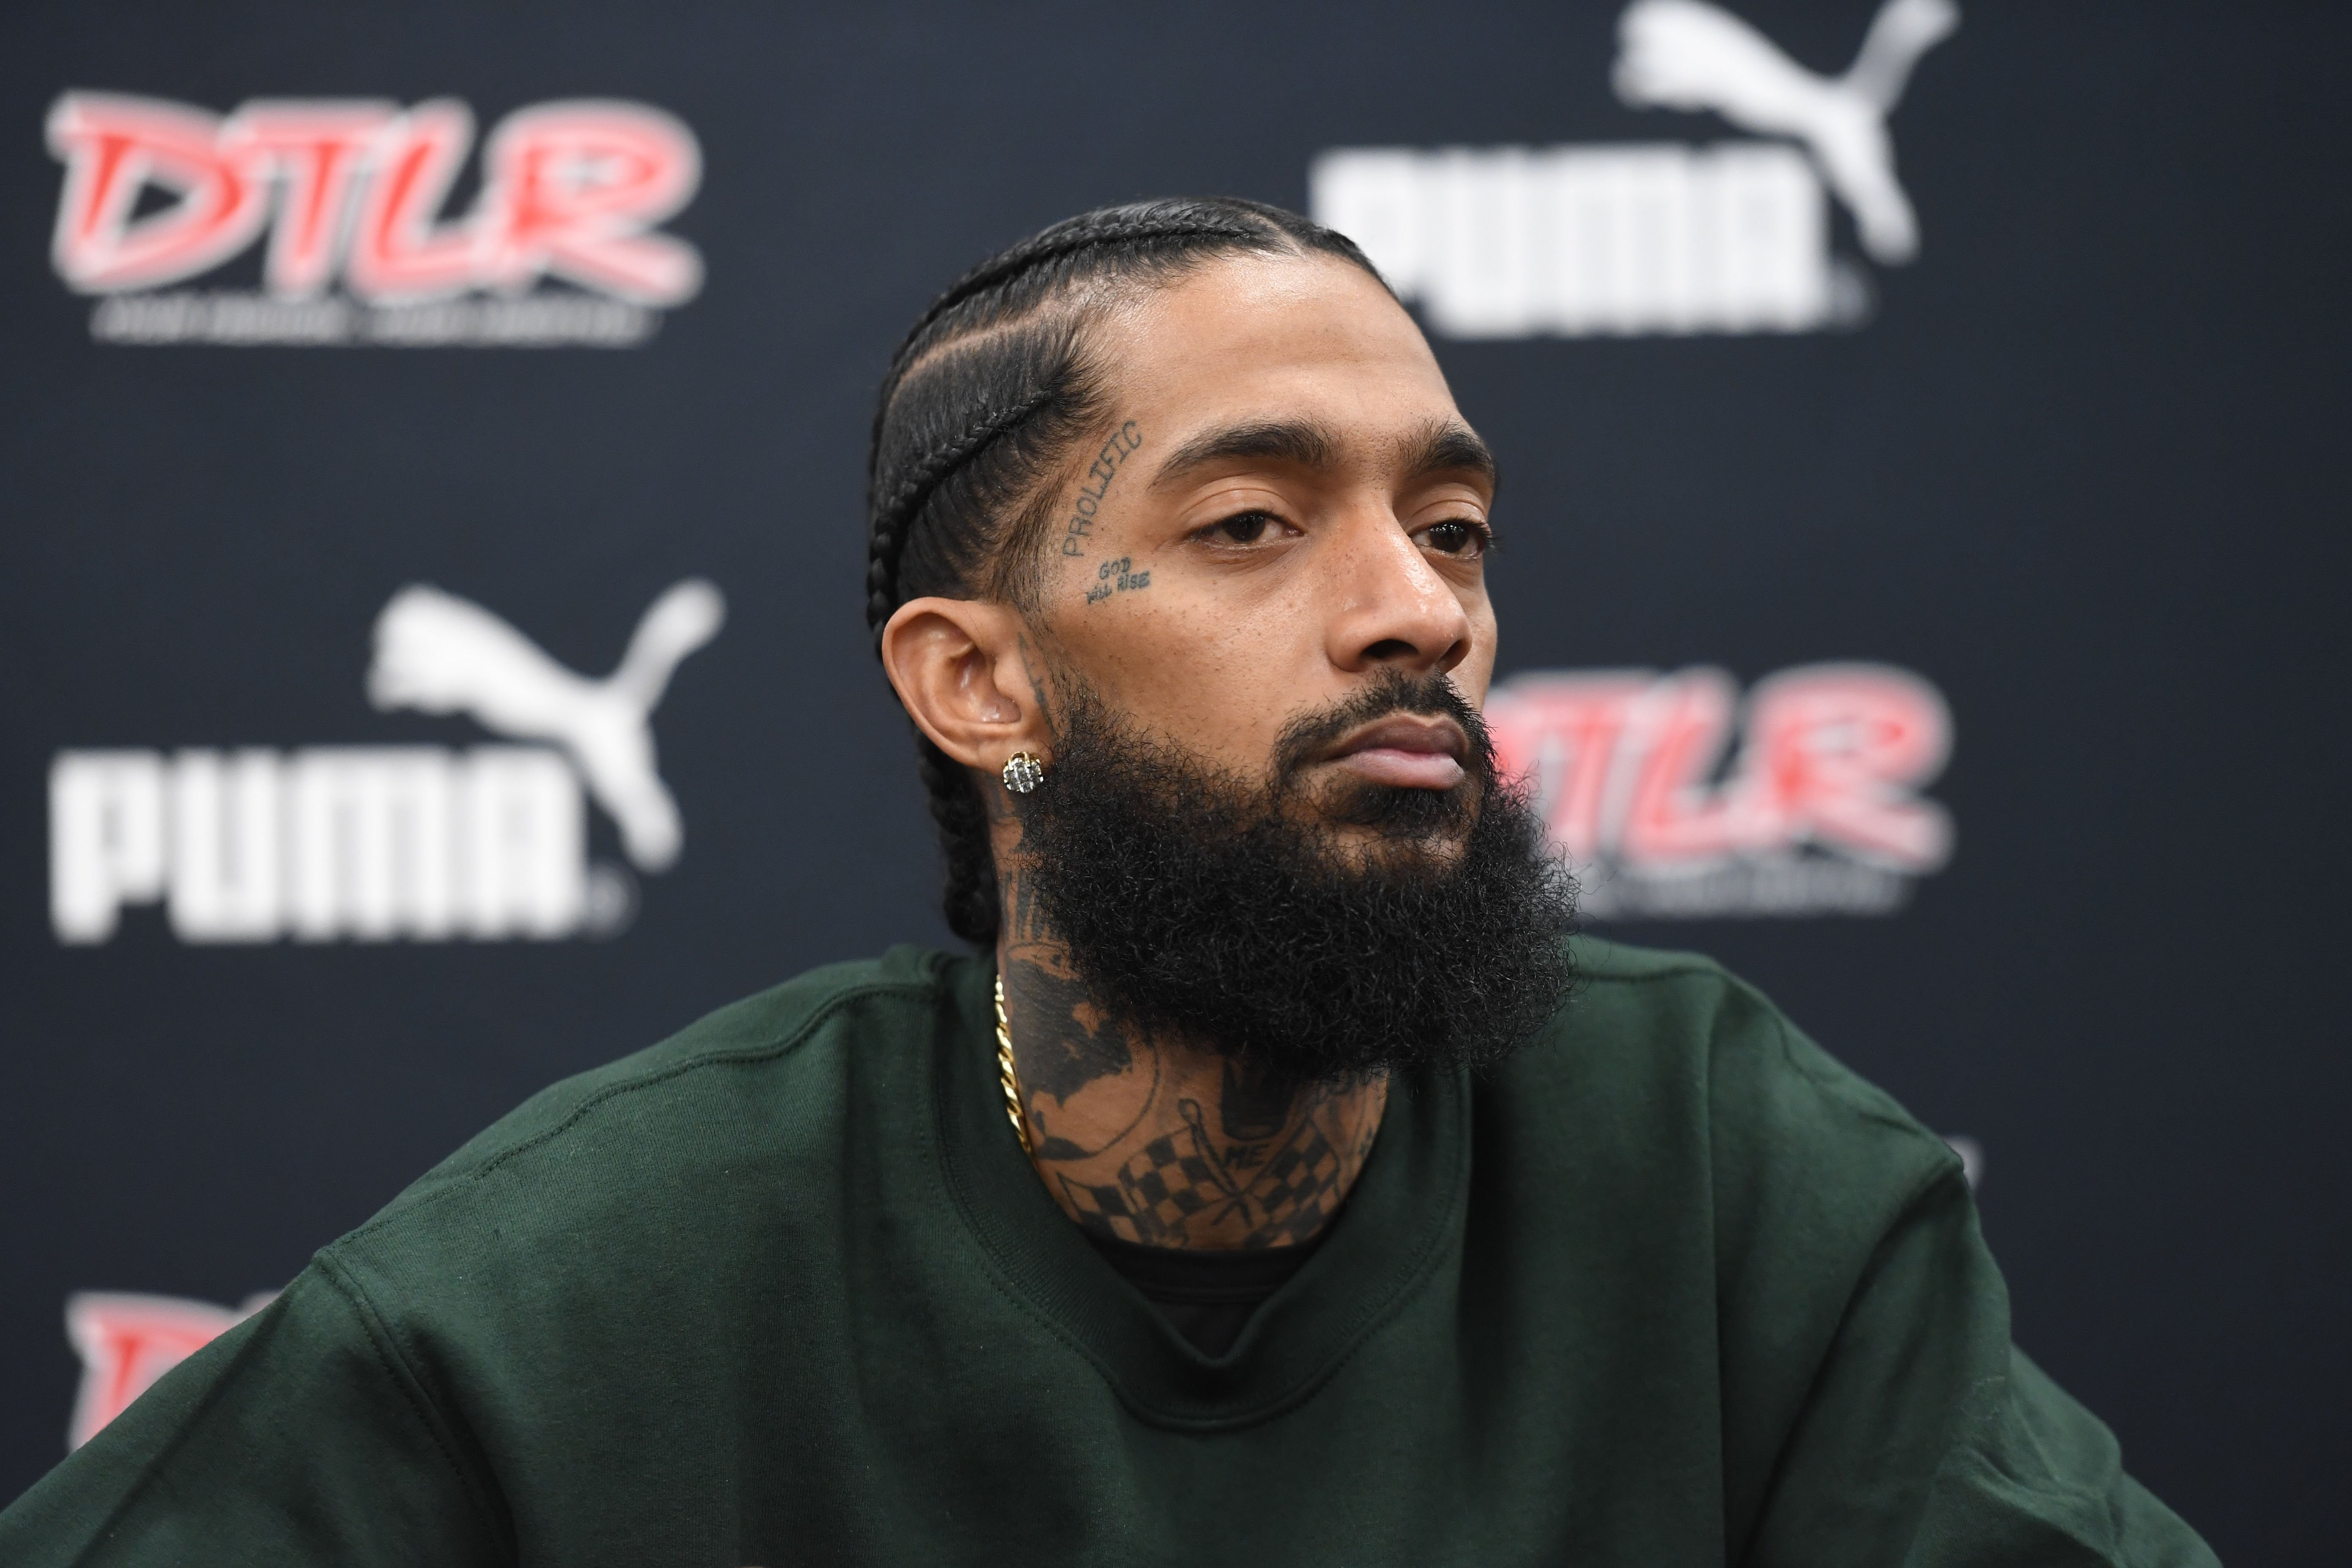 Nipsey Hussle attends his "Victory Lap" CD Signing at DTLR on February 25, 2018. | Photo: GettyImages